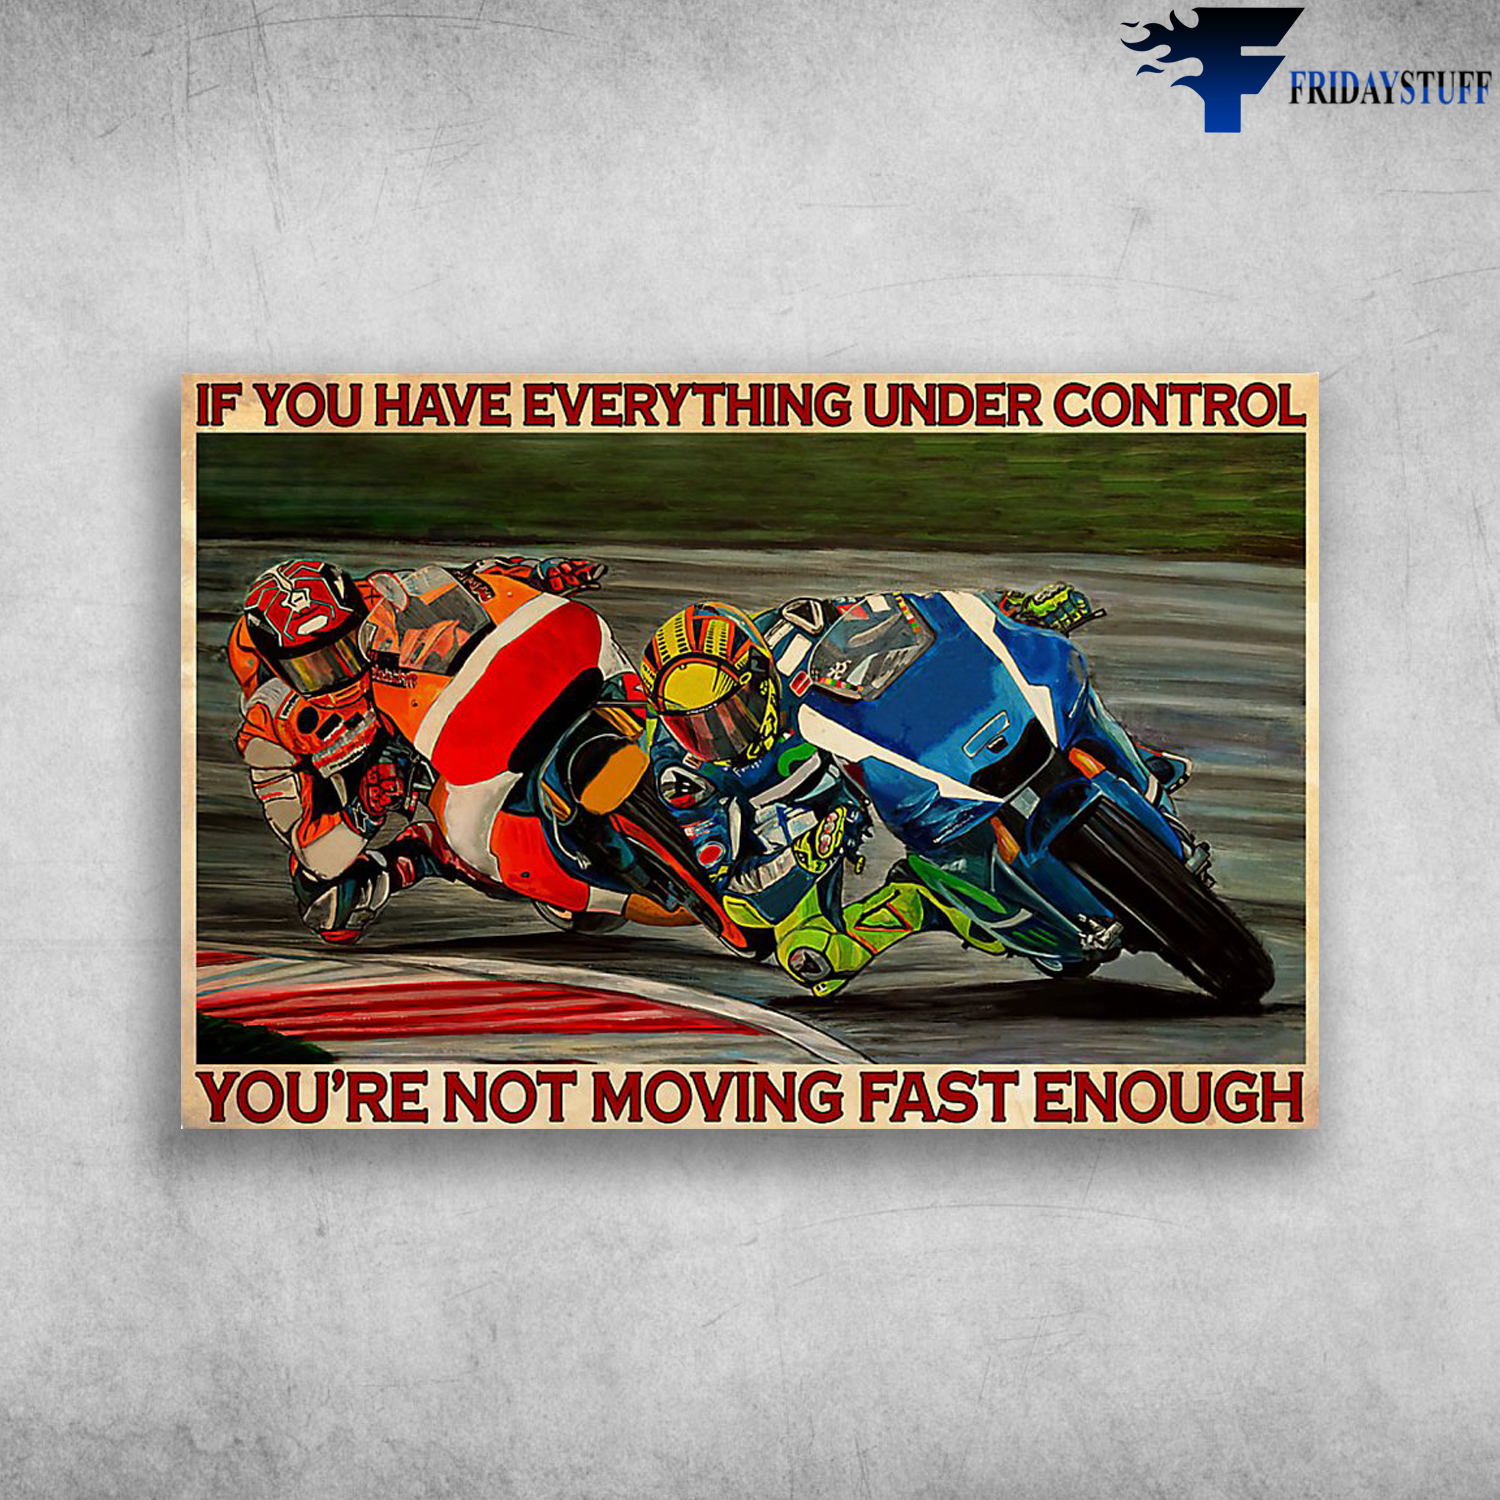 If you have everything under control, you're not moving fast enought